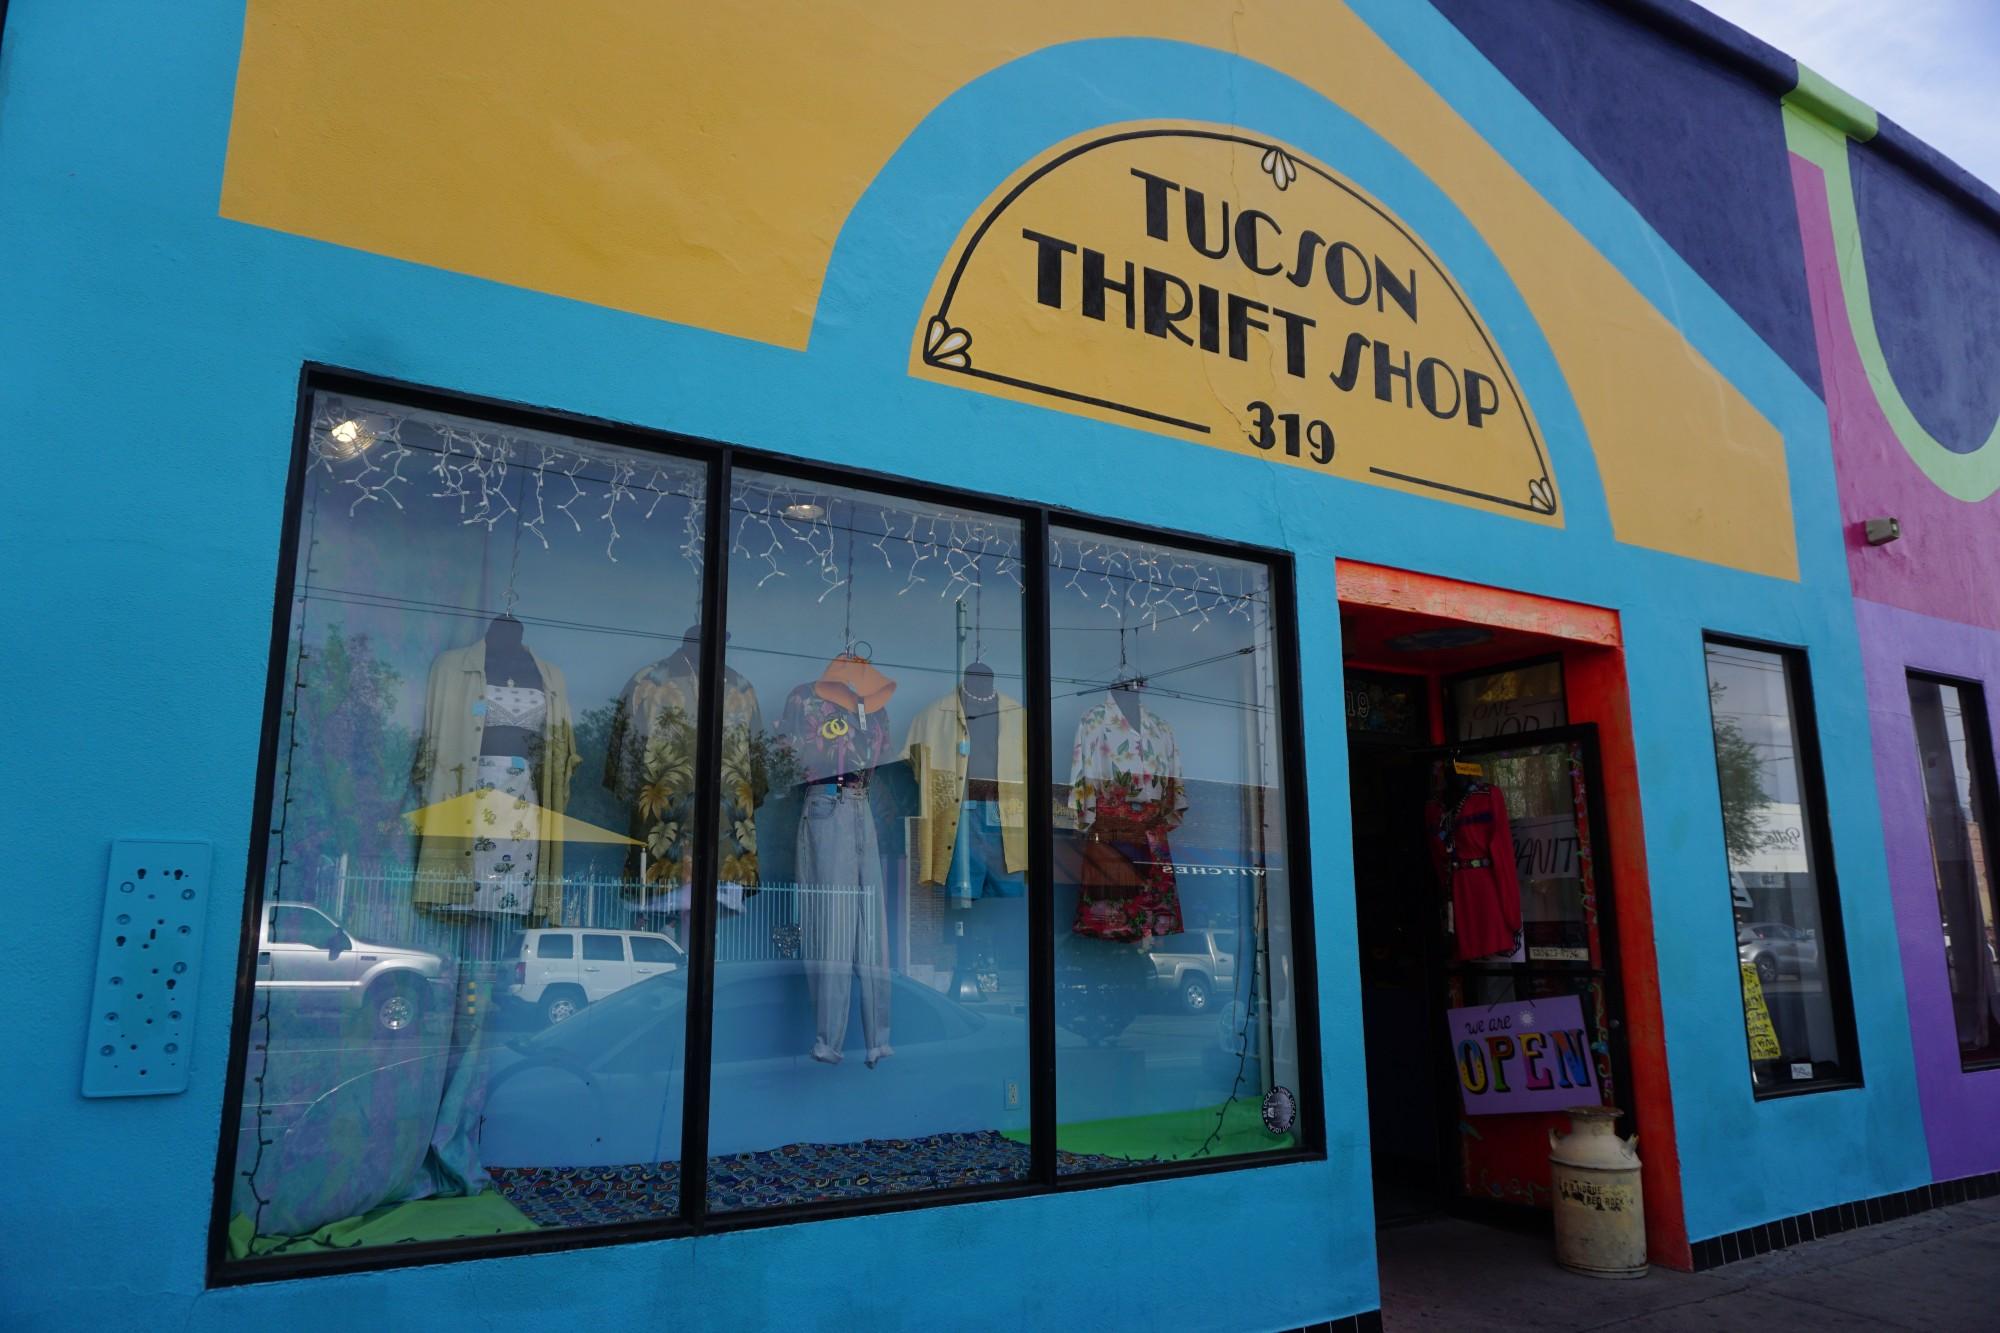 Tucson Thrift Shop sells a range of styles spanning decades and is located on 319 N. Fourth Ave. 